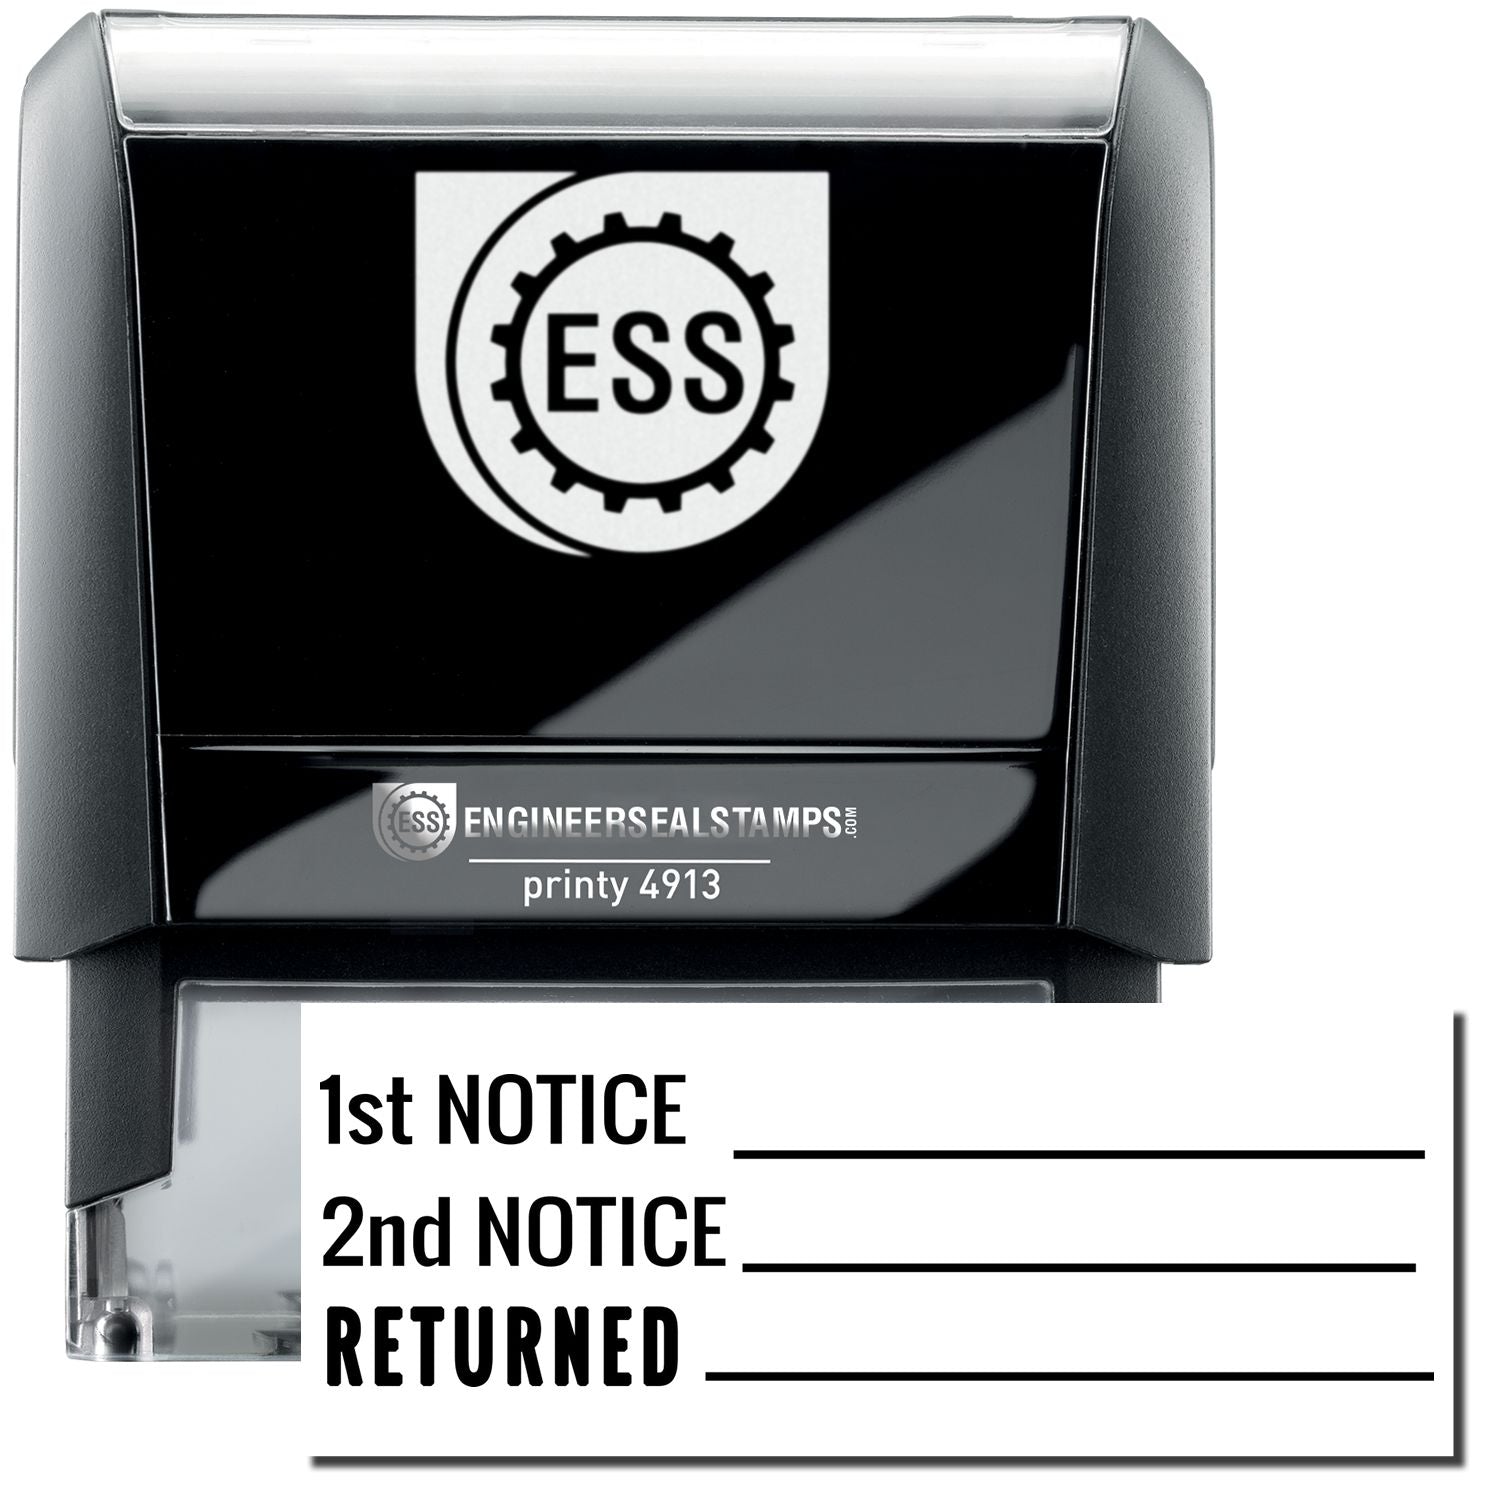 A self-inking stamp with a stamped image showing how the text "1st NOTICE", "2nd NOTICE", and "RETURNED" in a large font with three lines in front of each one of them are displayed after stamping.